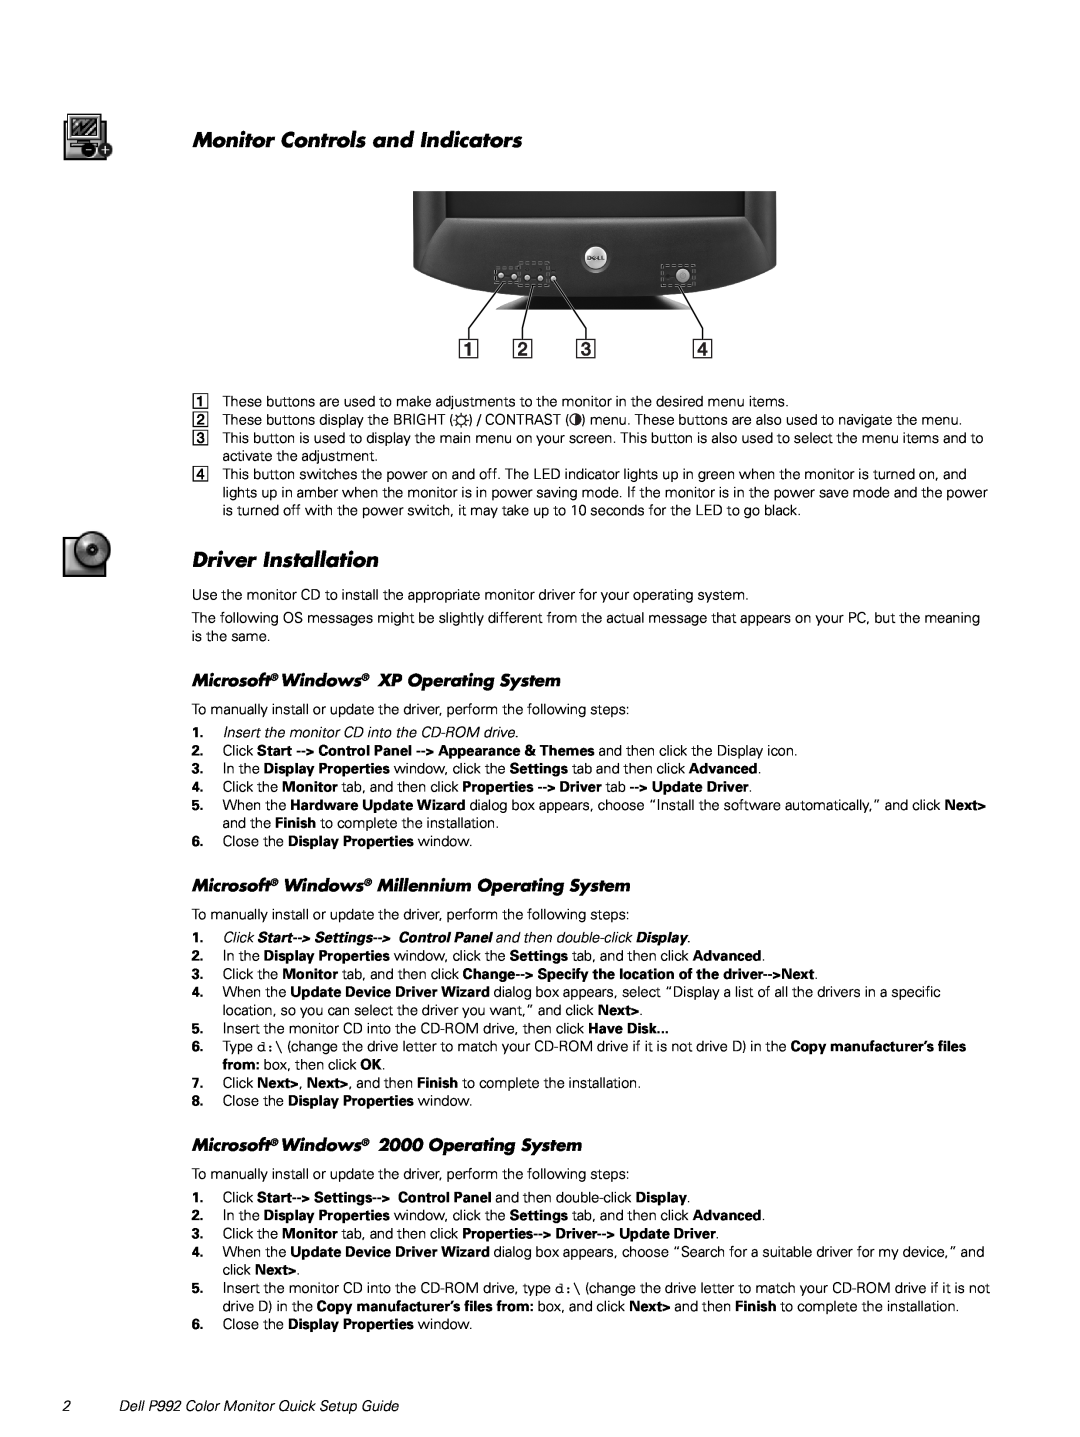 Dell P992 specifications Monitor Controls and Indicators, Driver Installation, Microsoft Windows XP Operating System 